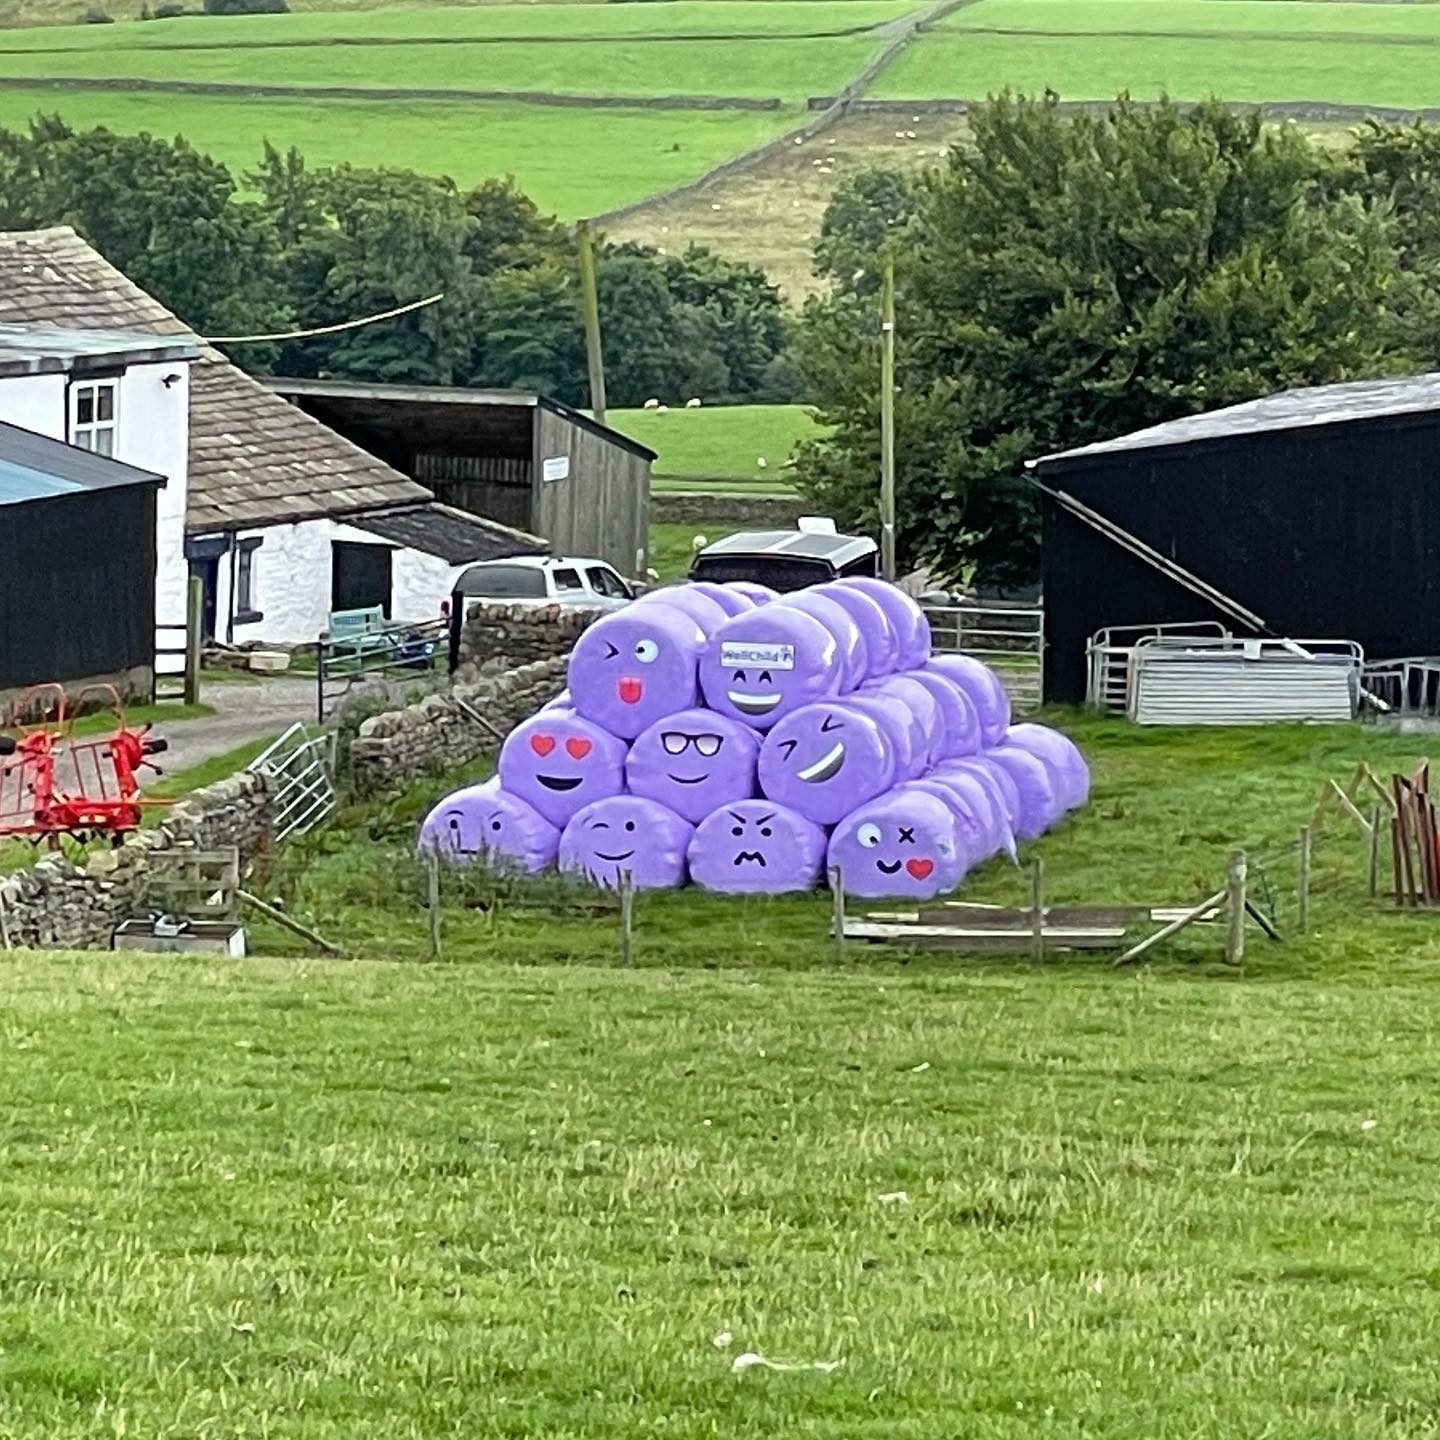 A brace of ‘forces’ with the clan to wrap the weekend, oh, and some happy bales #teesdale